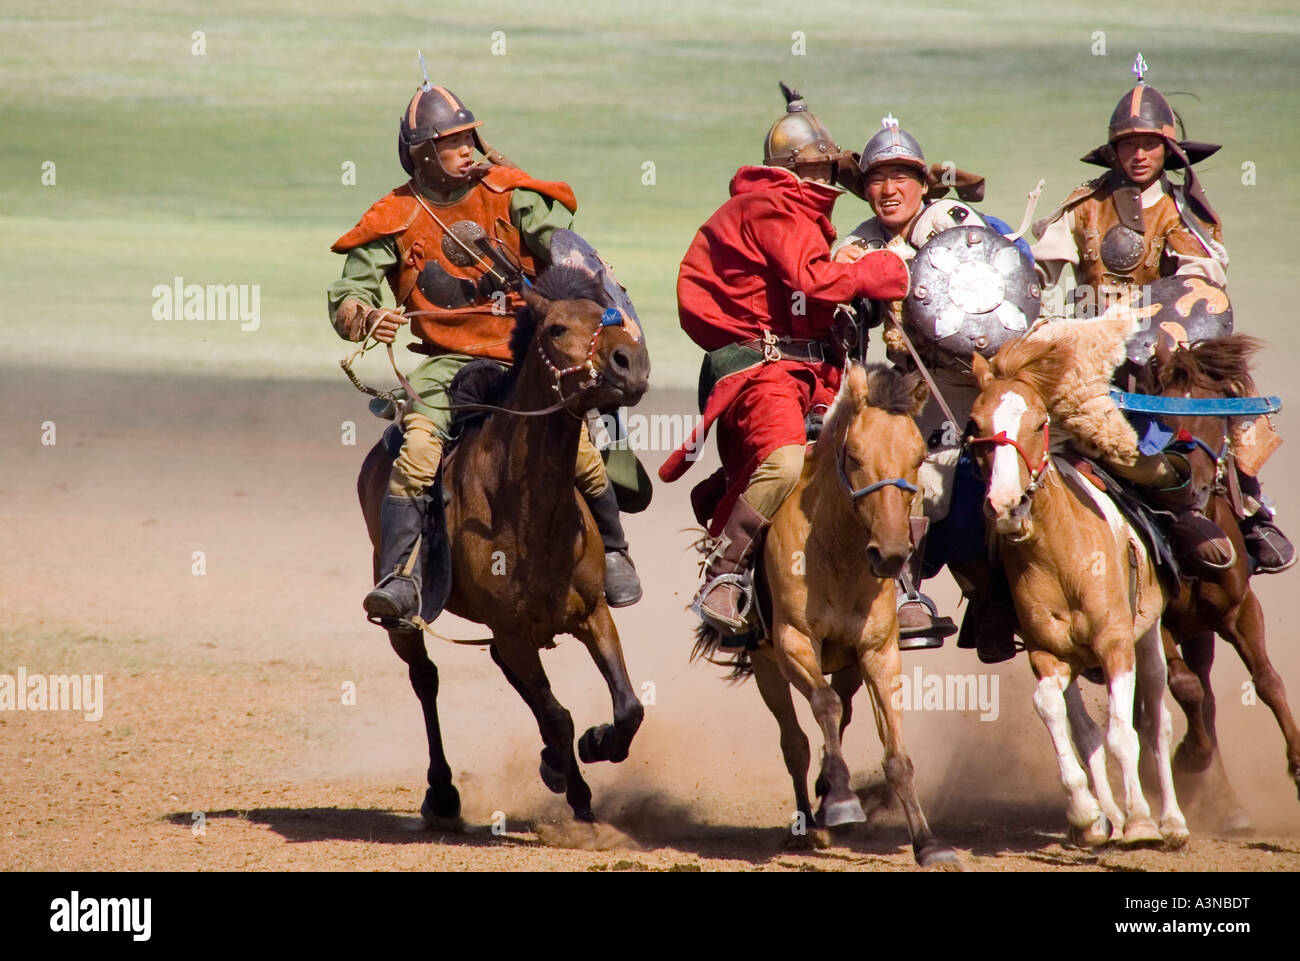 Four Armed Mongolian horsemen riding in close formation Stock Photo